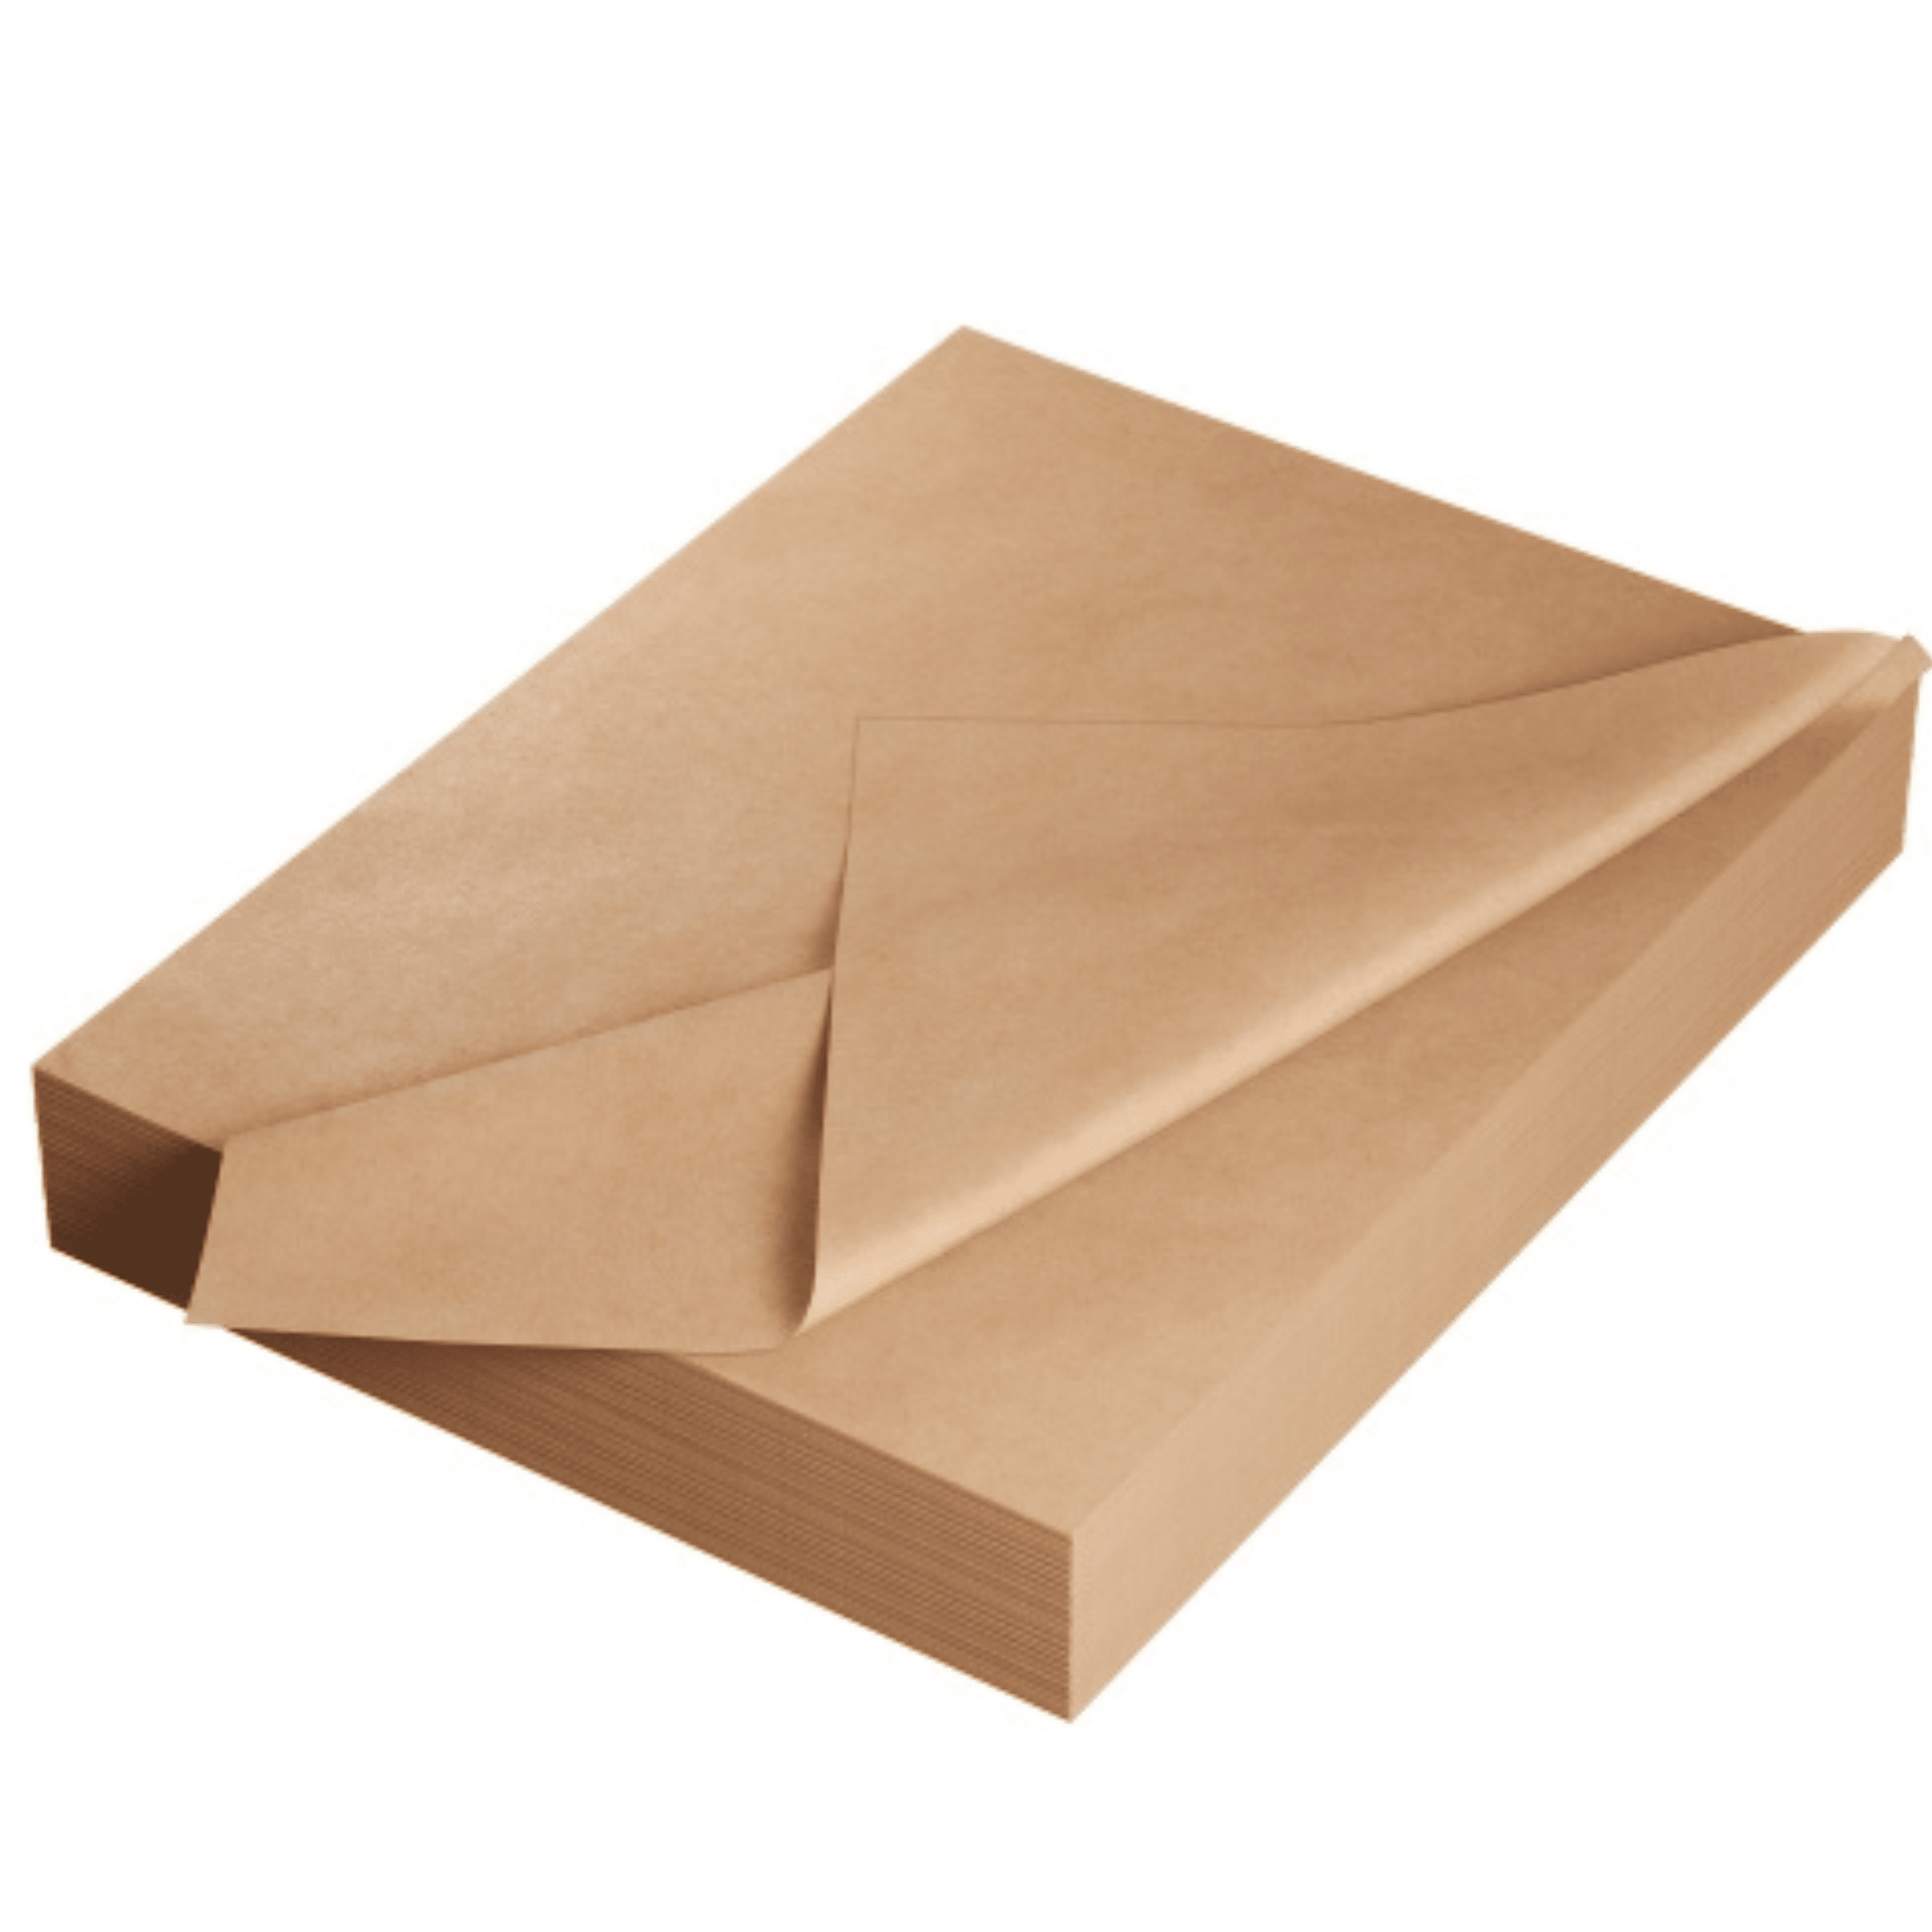 Rolling Brown Kraft Paper 15 inch x 1625' by Paper Mart